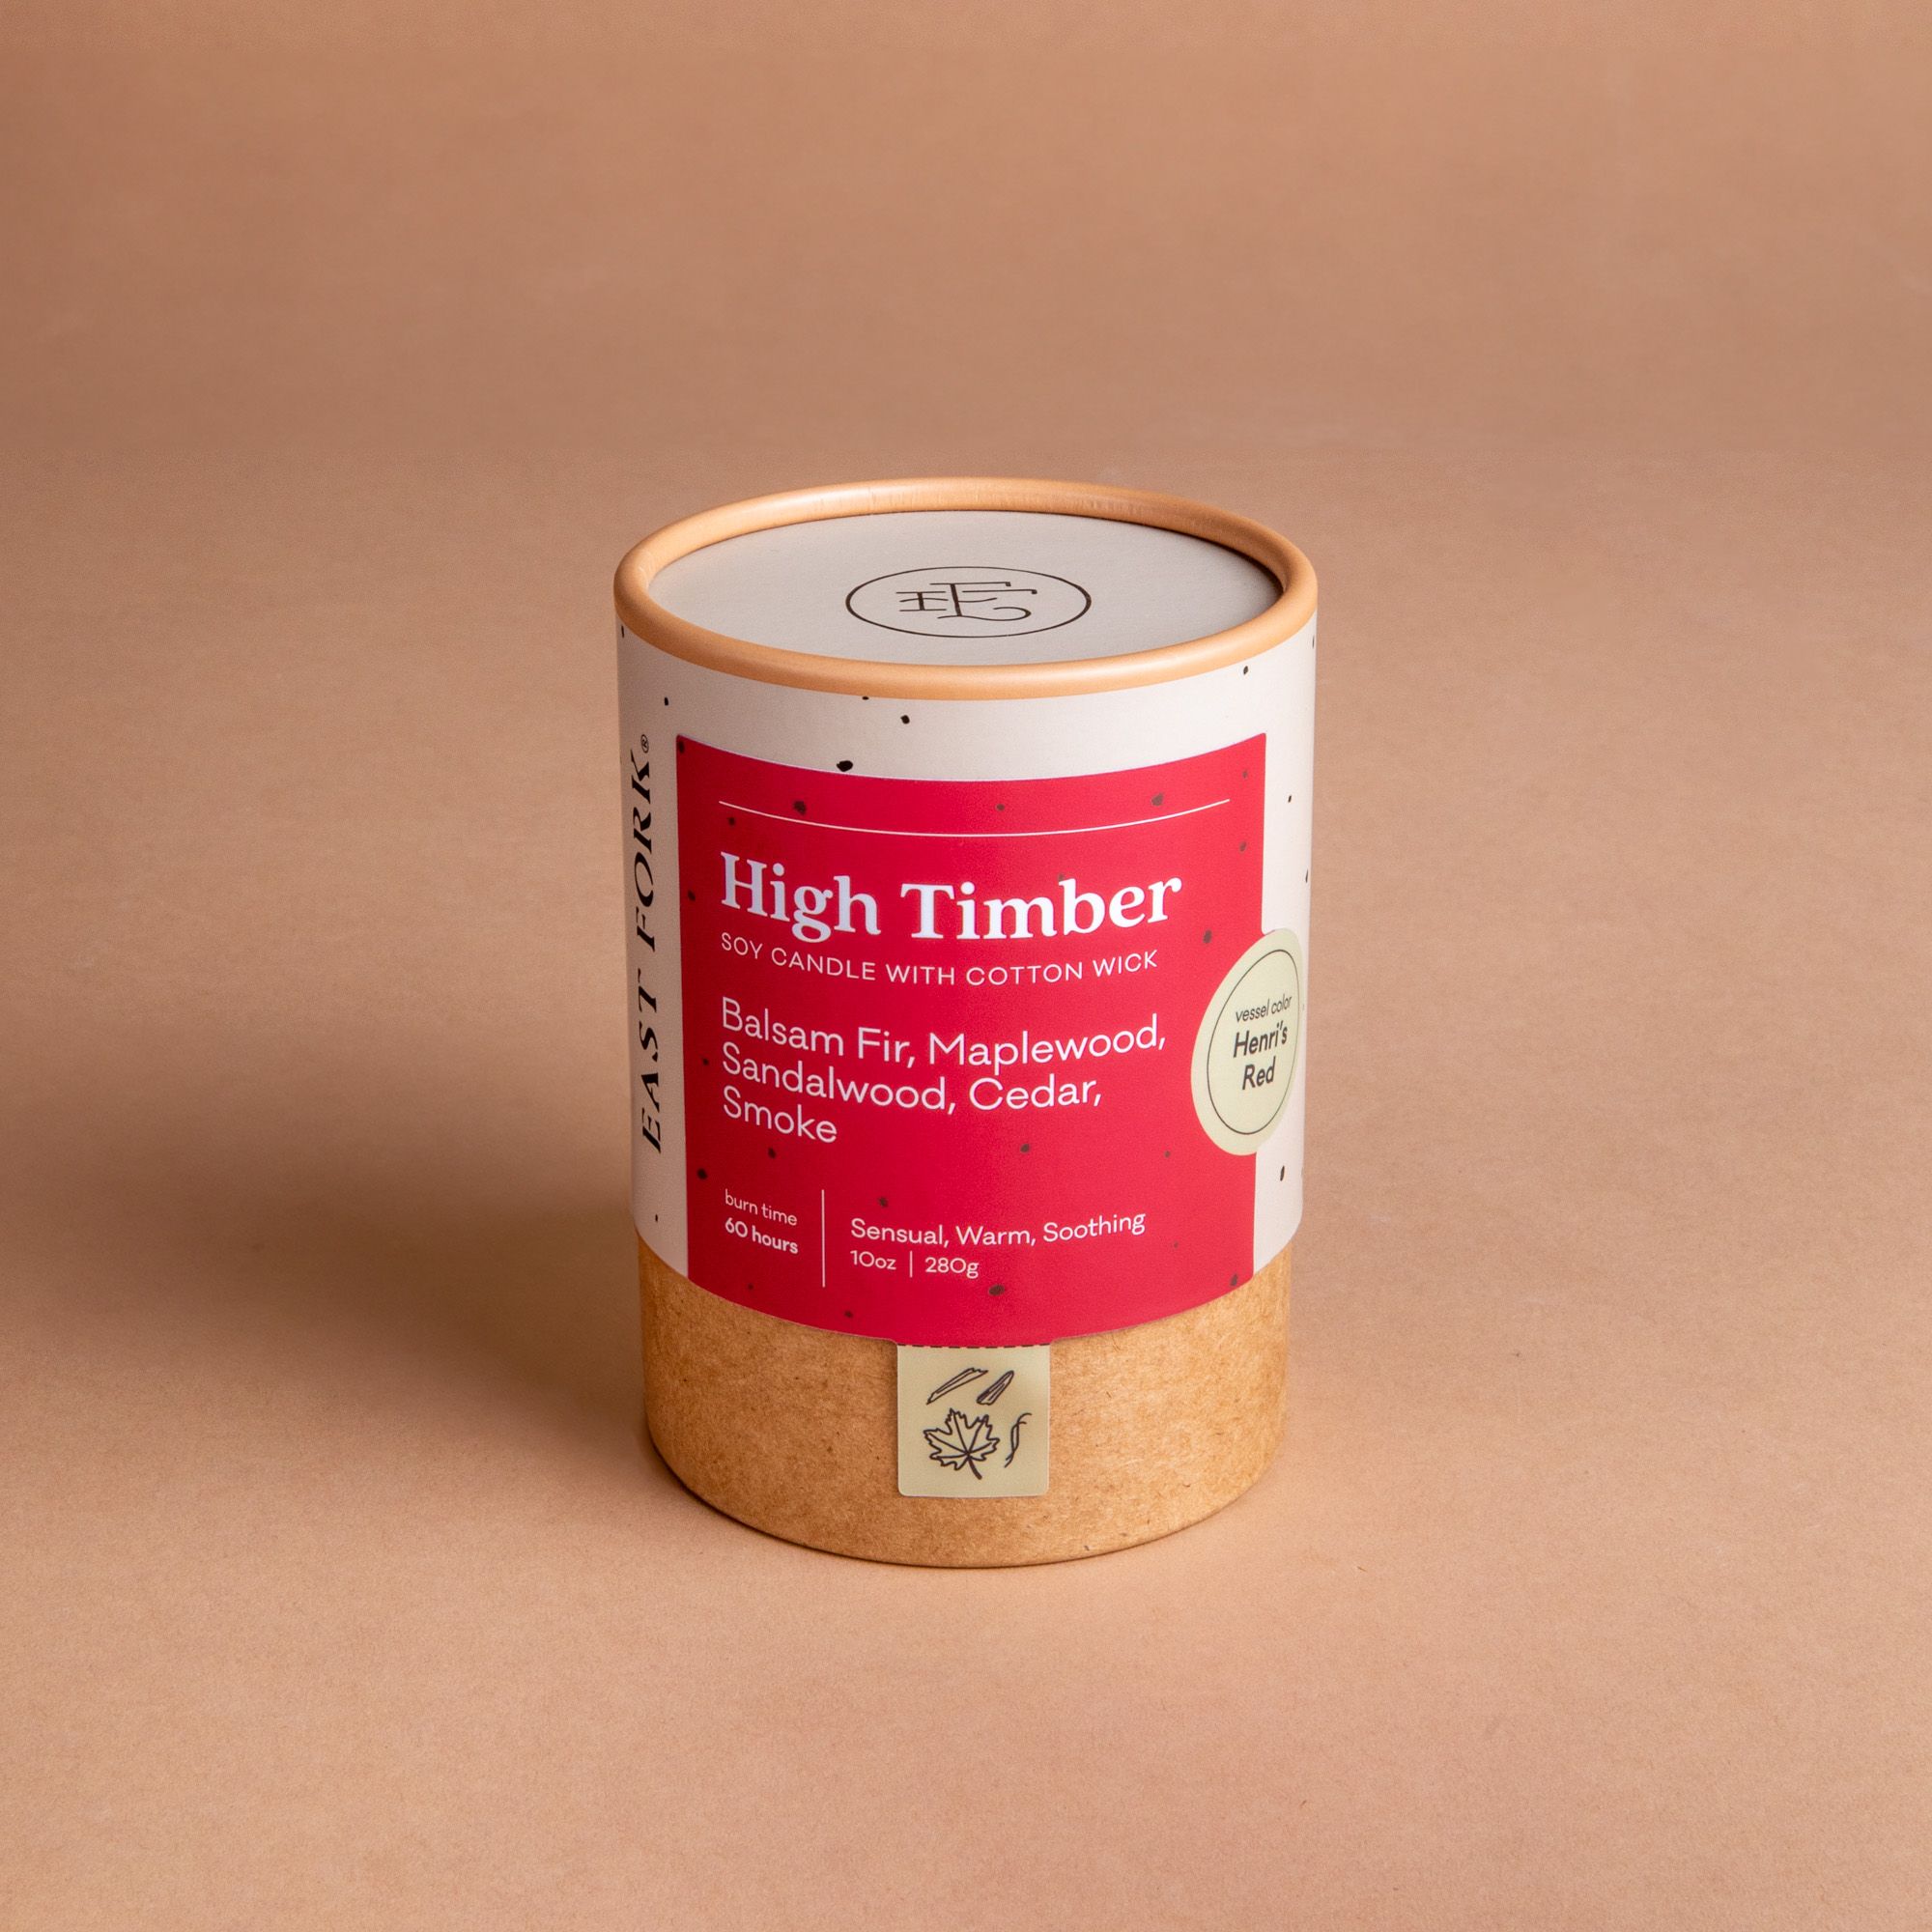 Large cardboard packaging tube with a candle inside with branding on it that says 'High Timber'